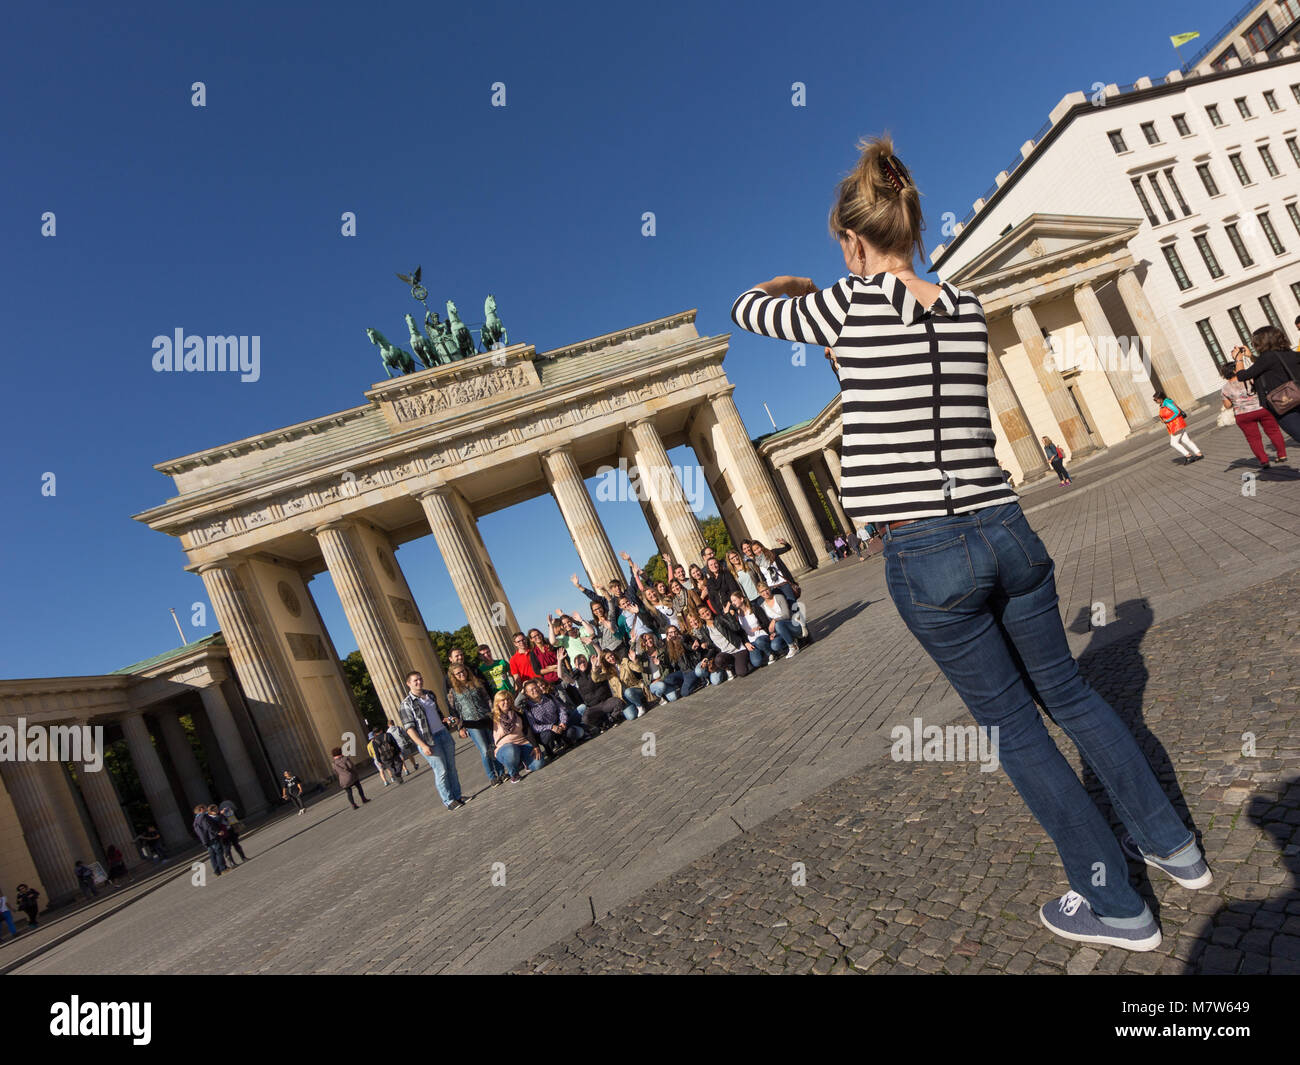 Group Photo Shoot of Tourists in Front of Berlin Brandenburg Gate Stock Photo